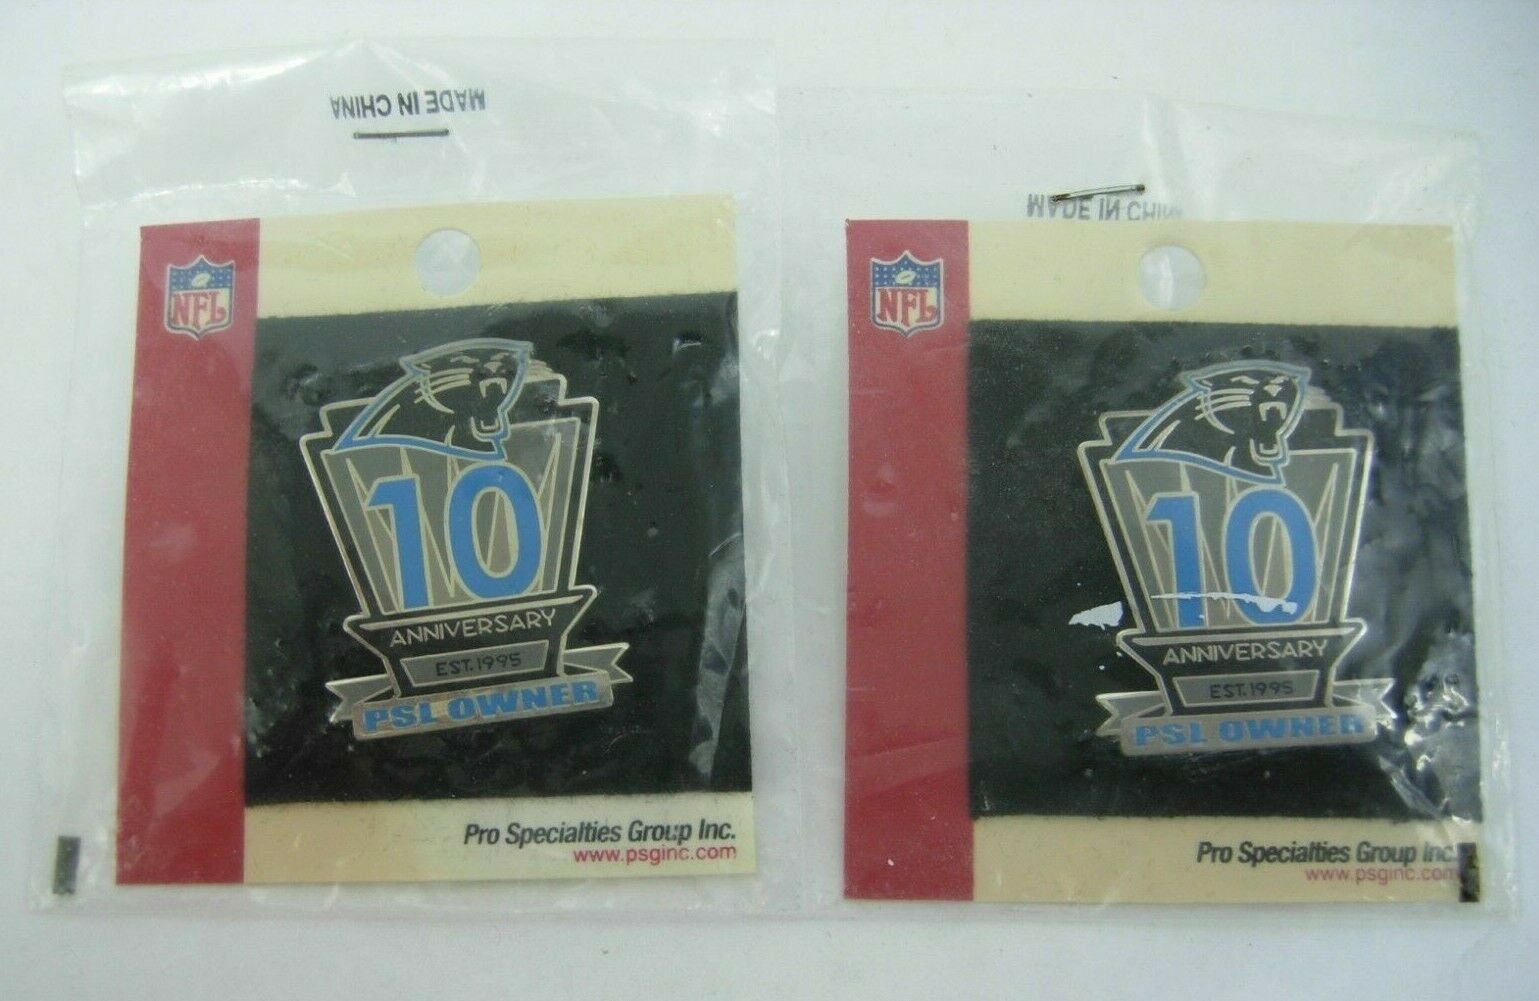 Carolina Panthers 10th Anniversary Est. 1995 PSL Owners Collectible Pin Lot of 2